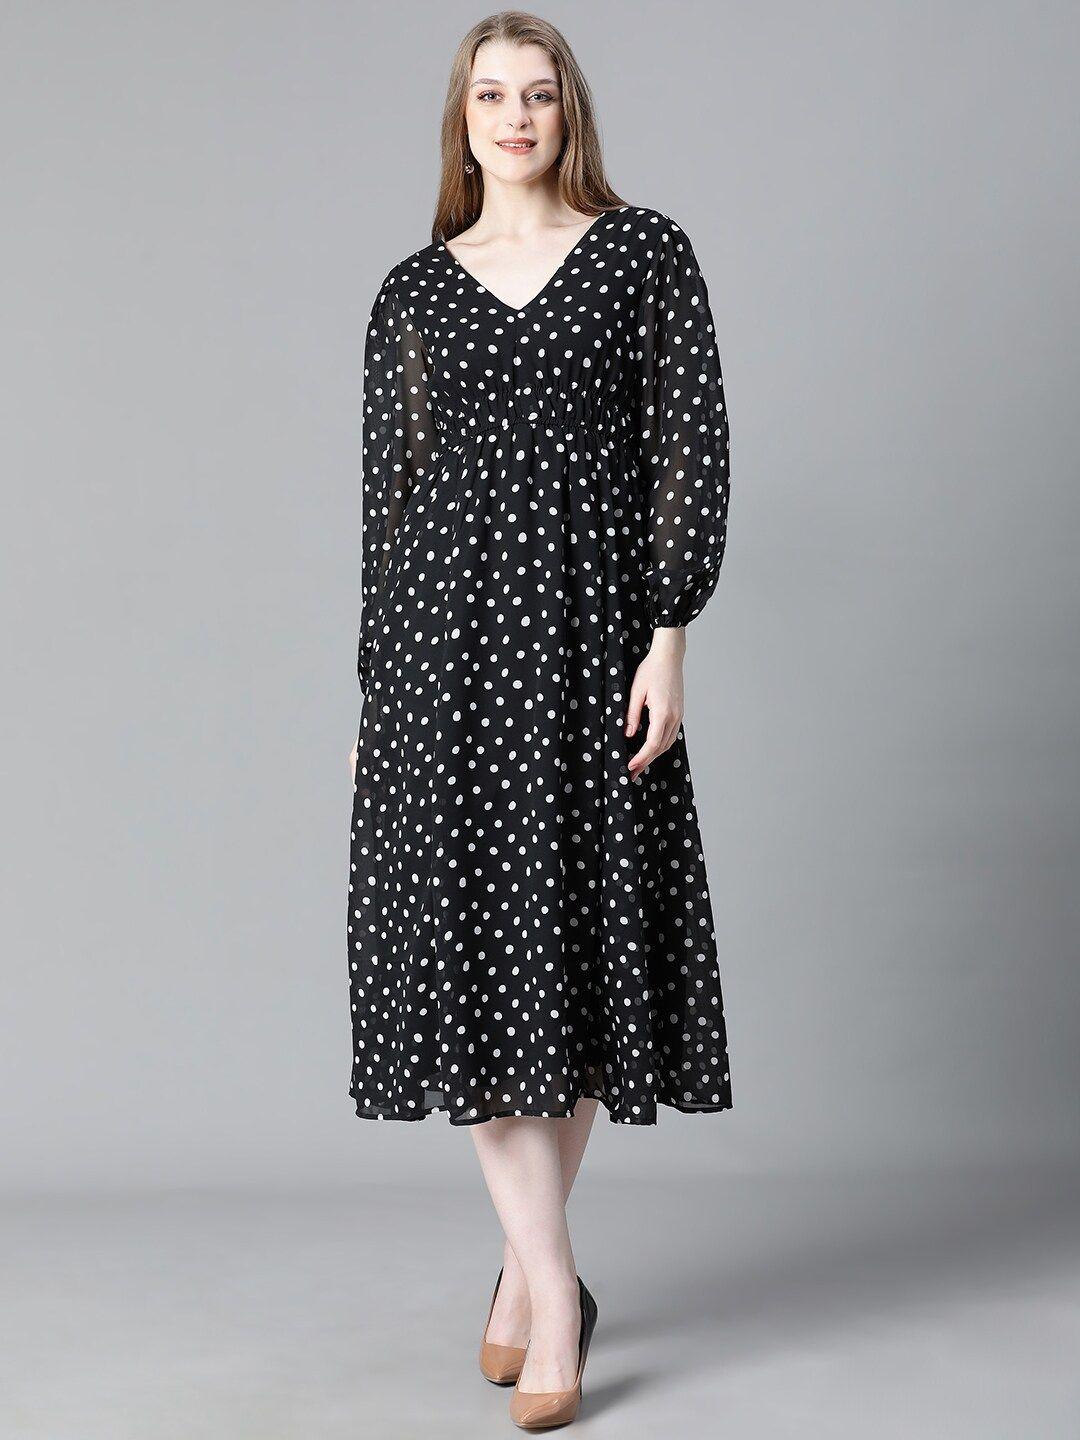 oxolloxo-polka-dots-printed-georgette-a-line-dress